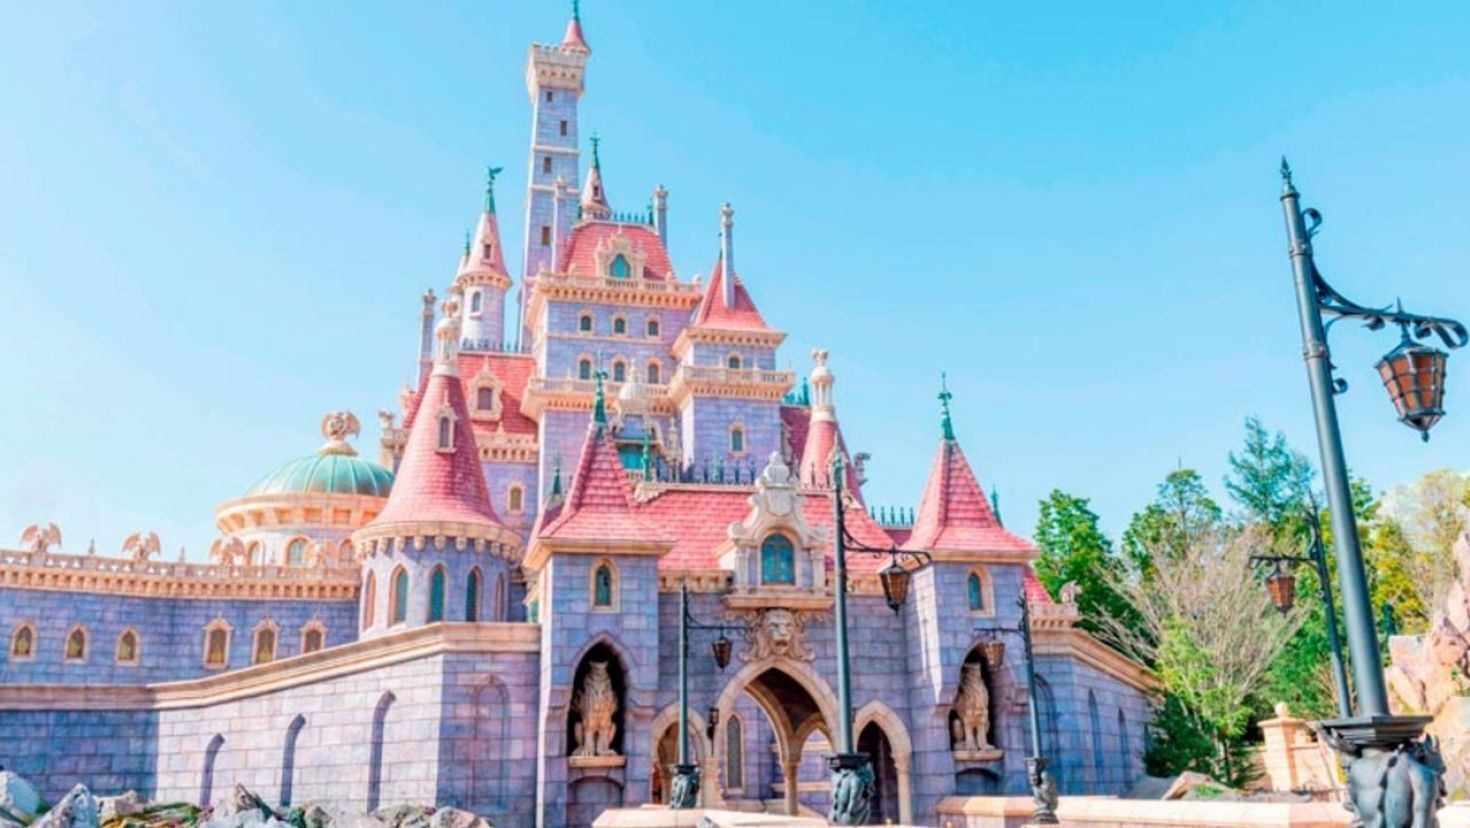 Tokyo Disneyland expansion with 'Beauty and the Beast' castle opening this month -   17 beauty And The Beast castle ideas